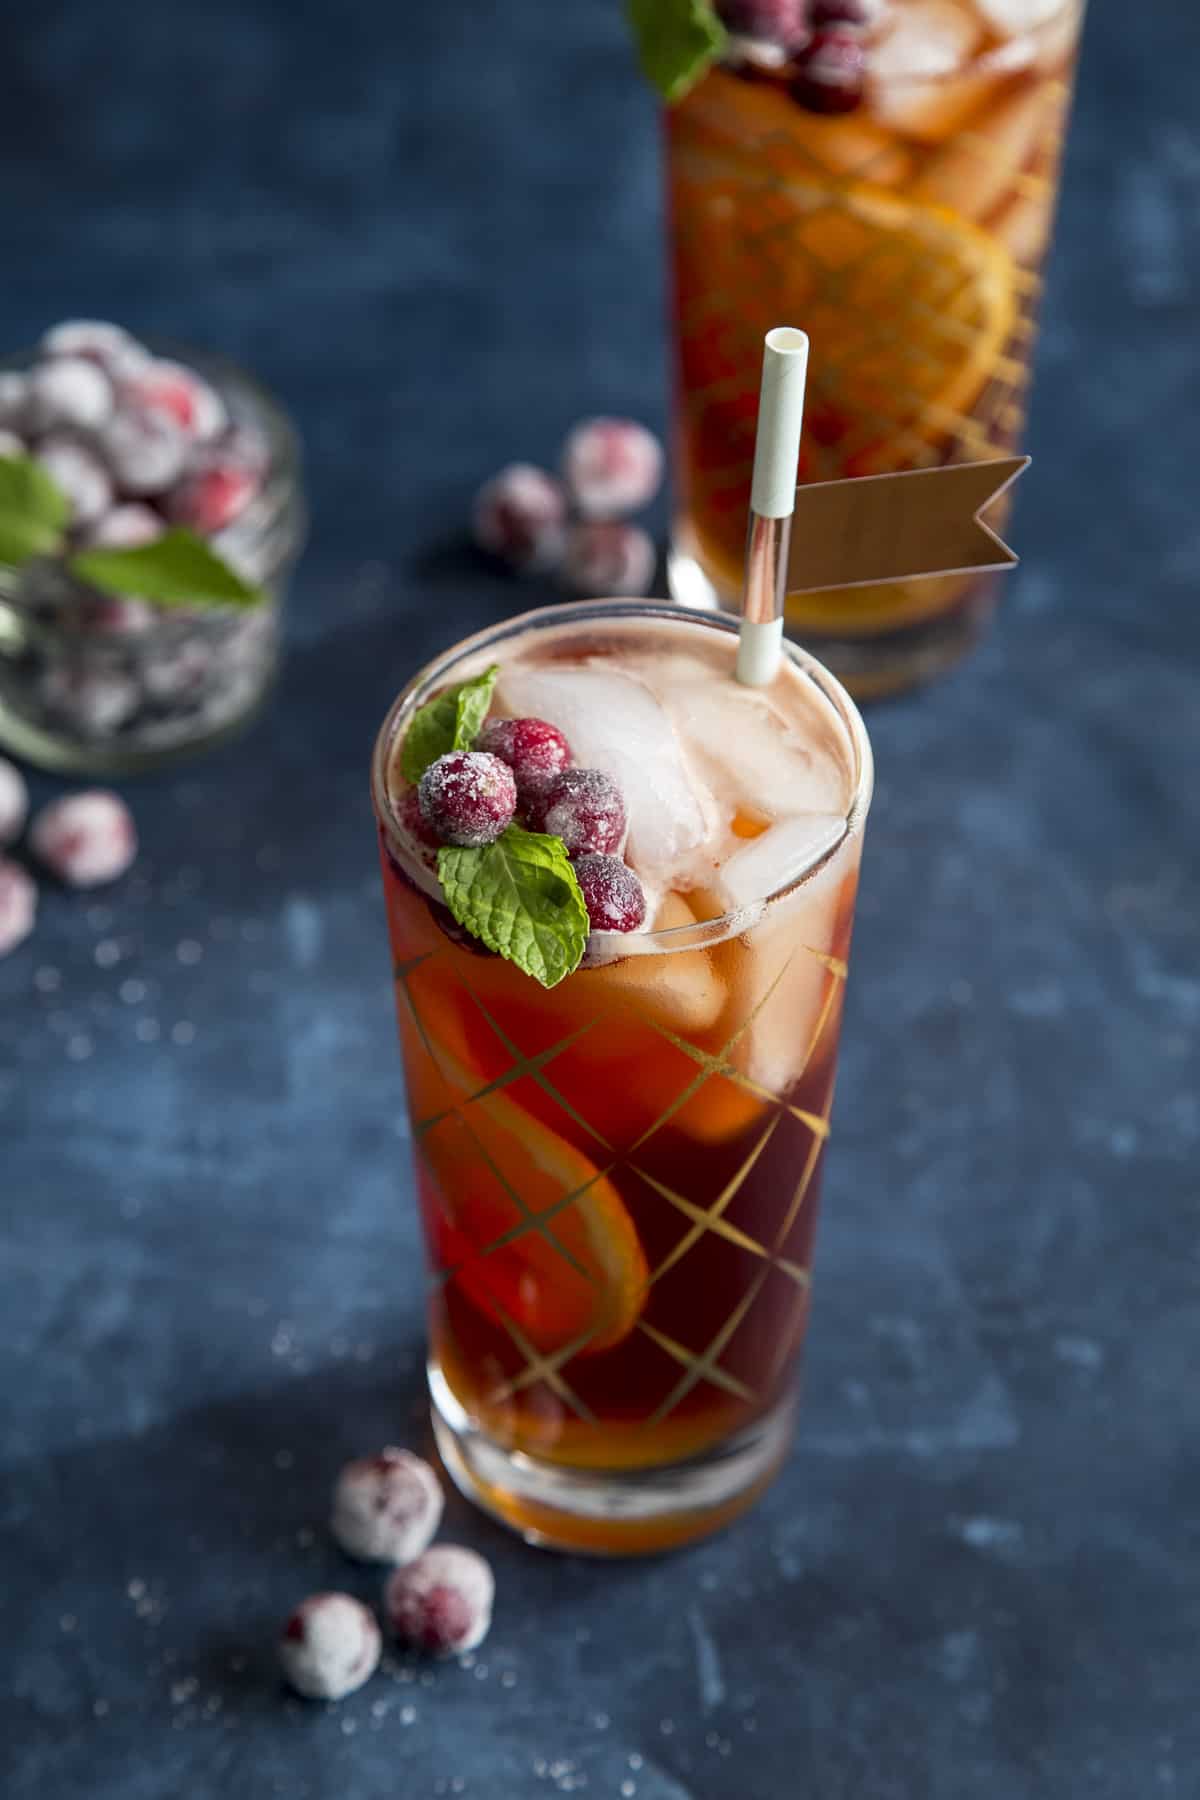 Cranberry Pimm's Cup cocktail garnished with sugared cranberries